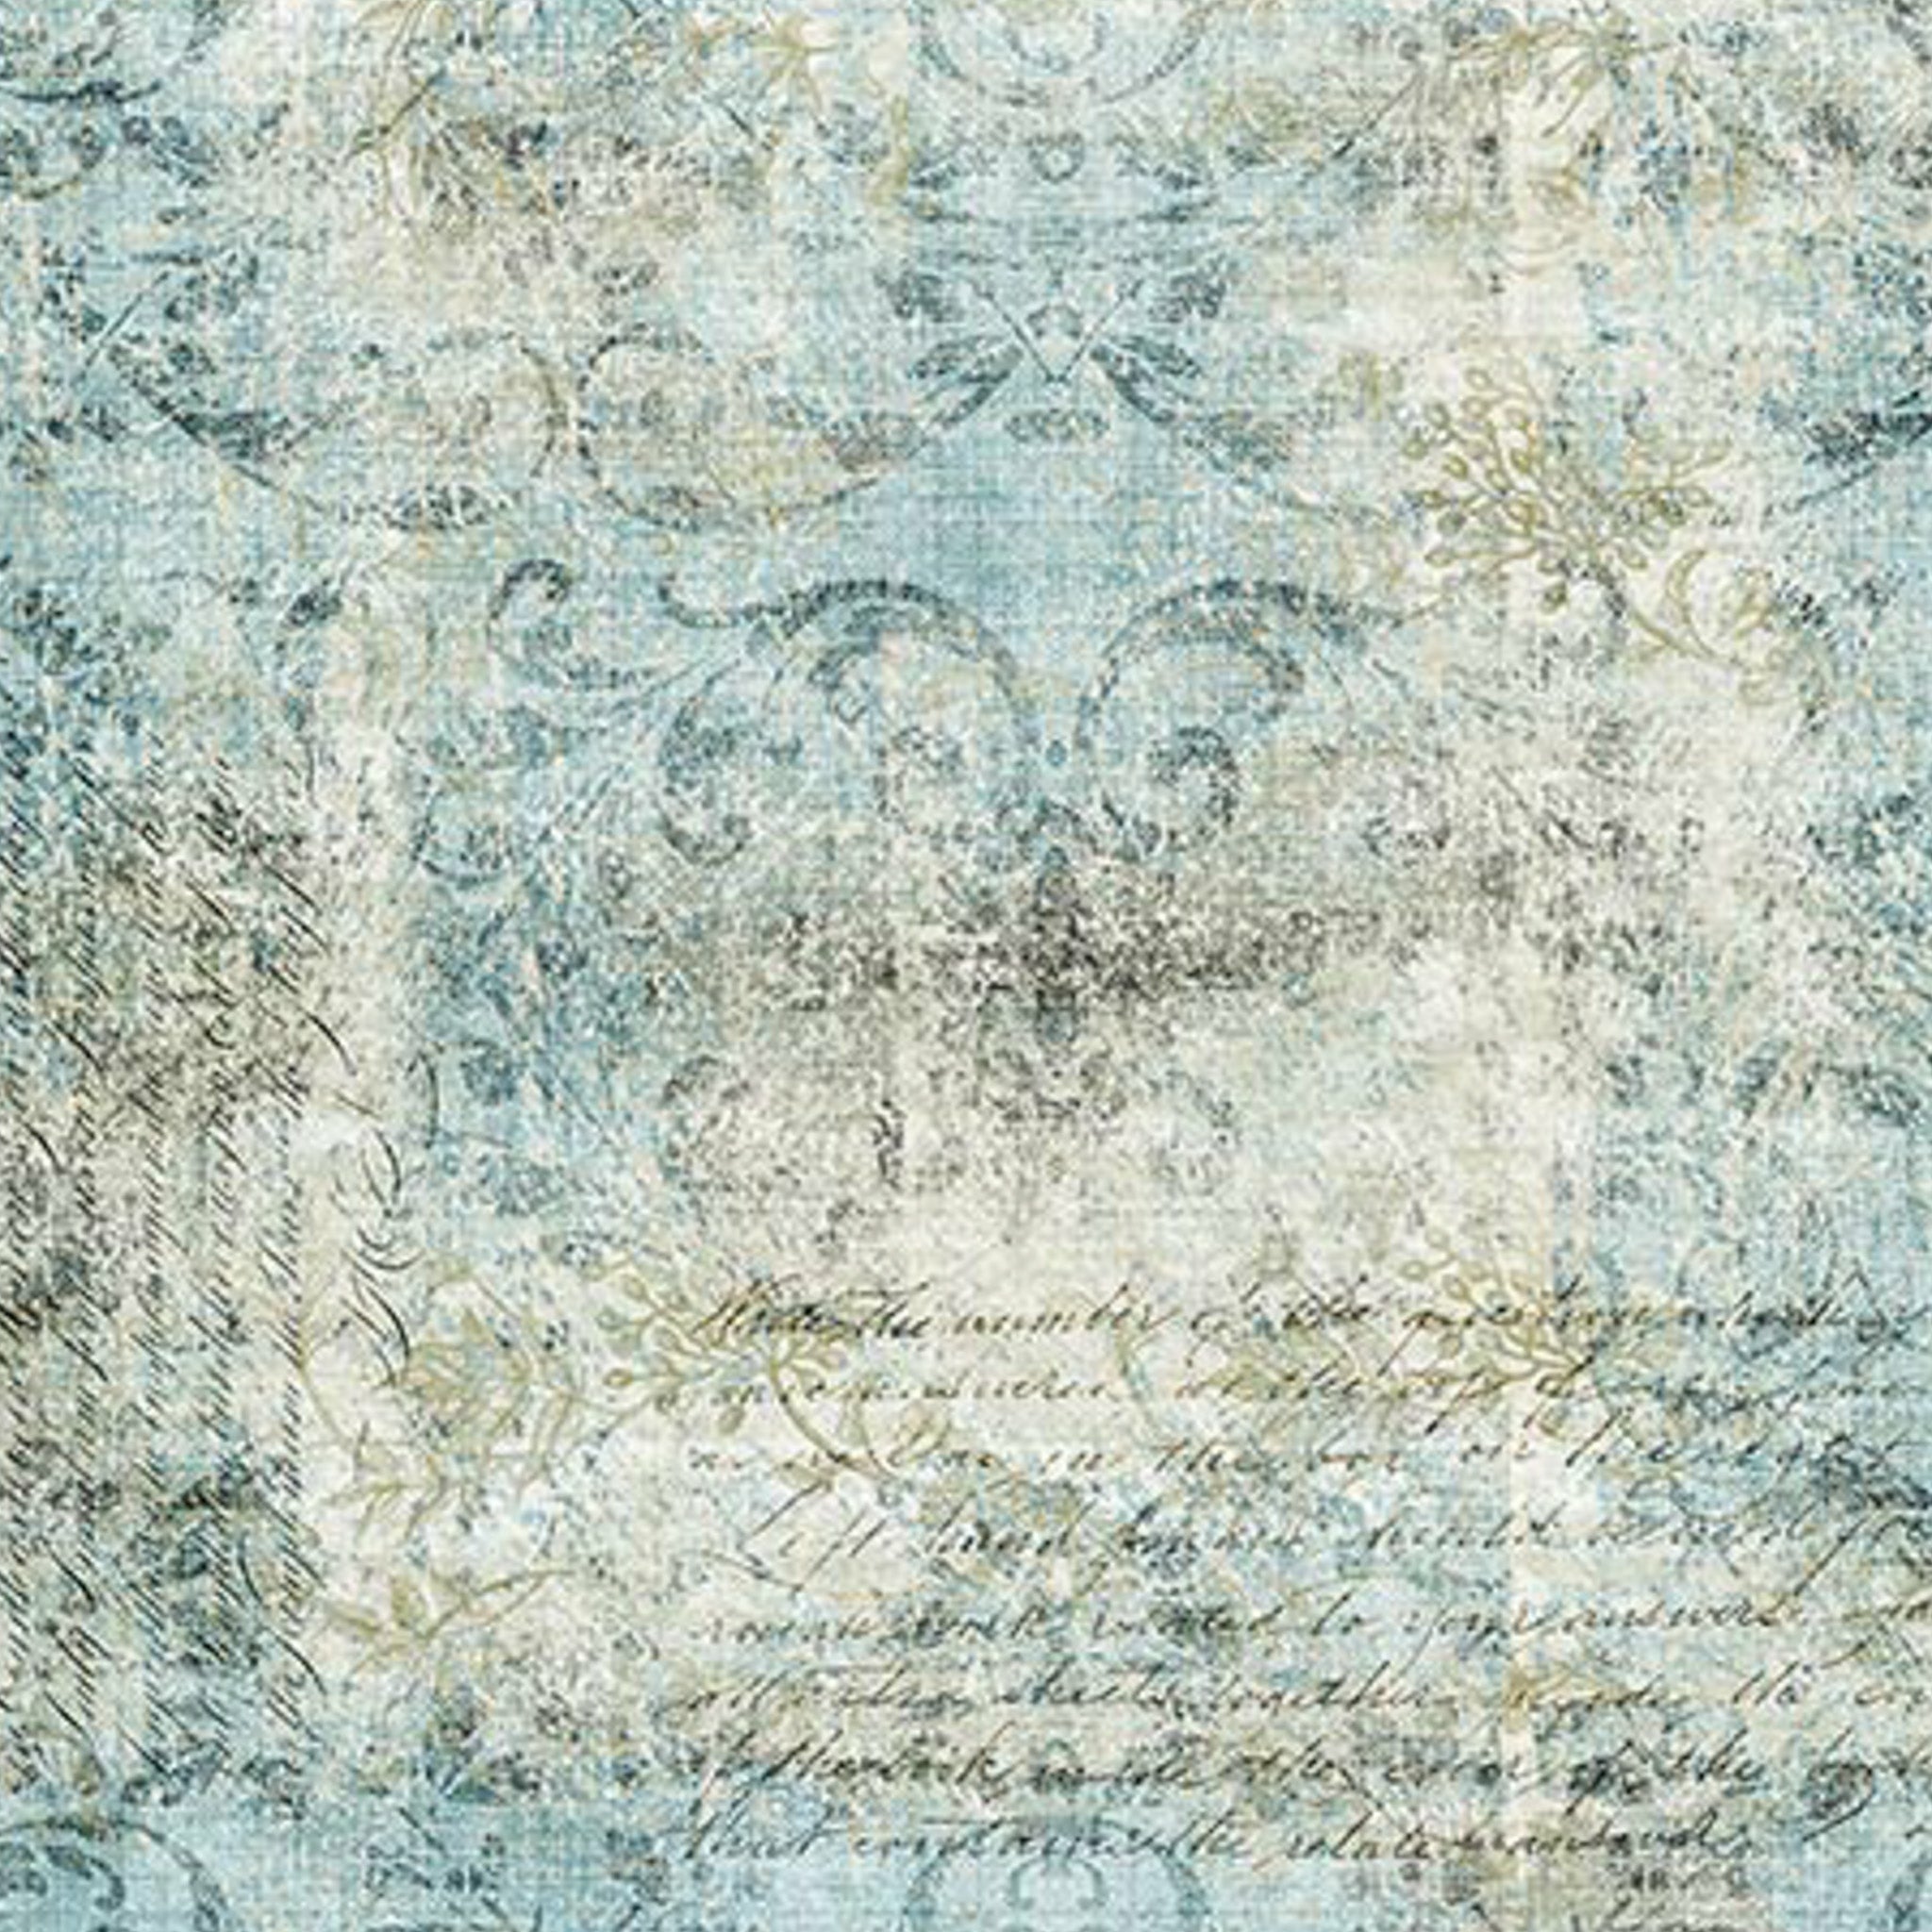 A1 rice decoupage paper of a faded light blue and cream colored fabric that has a worn damask scroll design and script writing.